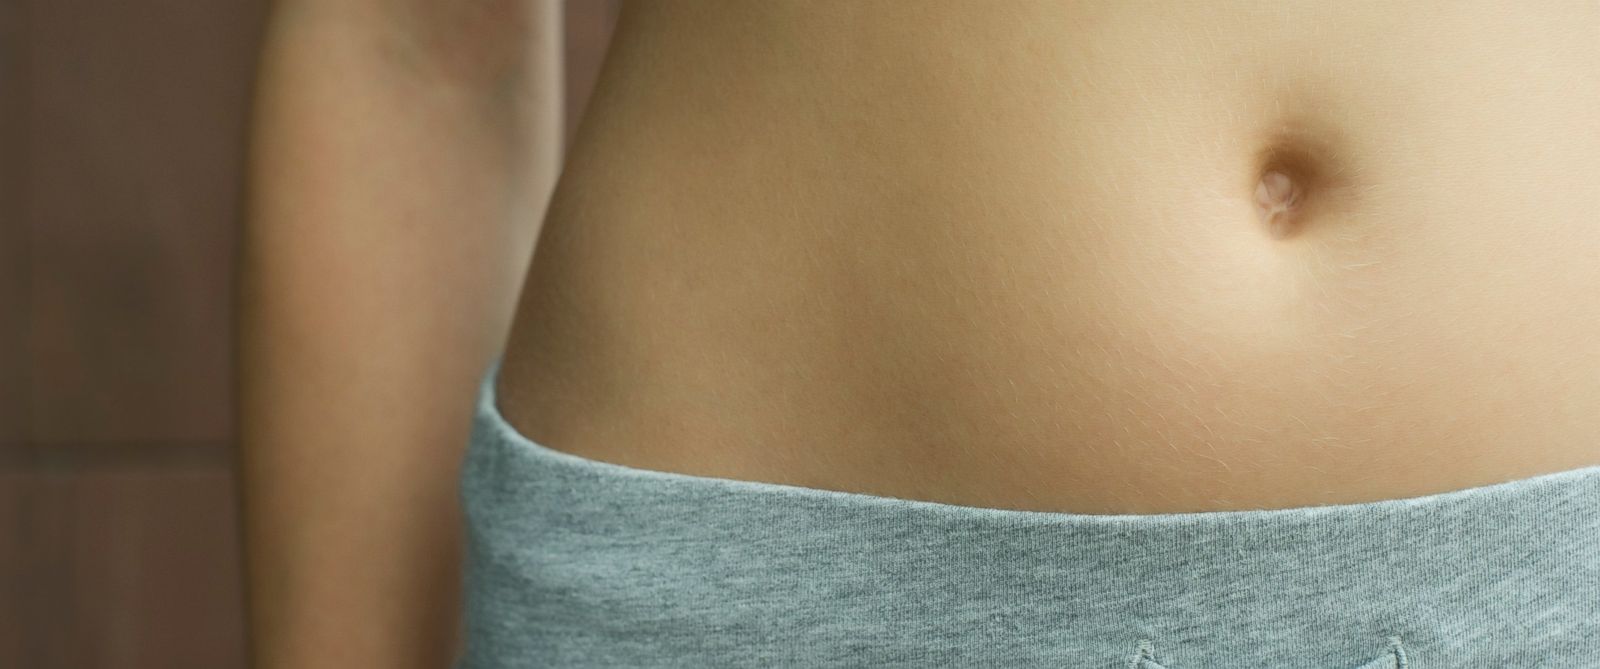 Belly Button Challenge Sends Negative Body Image Message Experts Say Abc News 